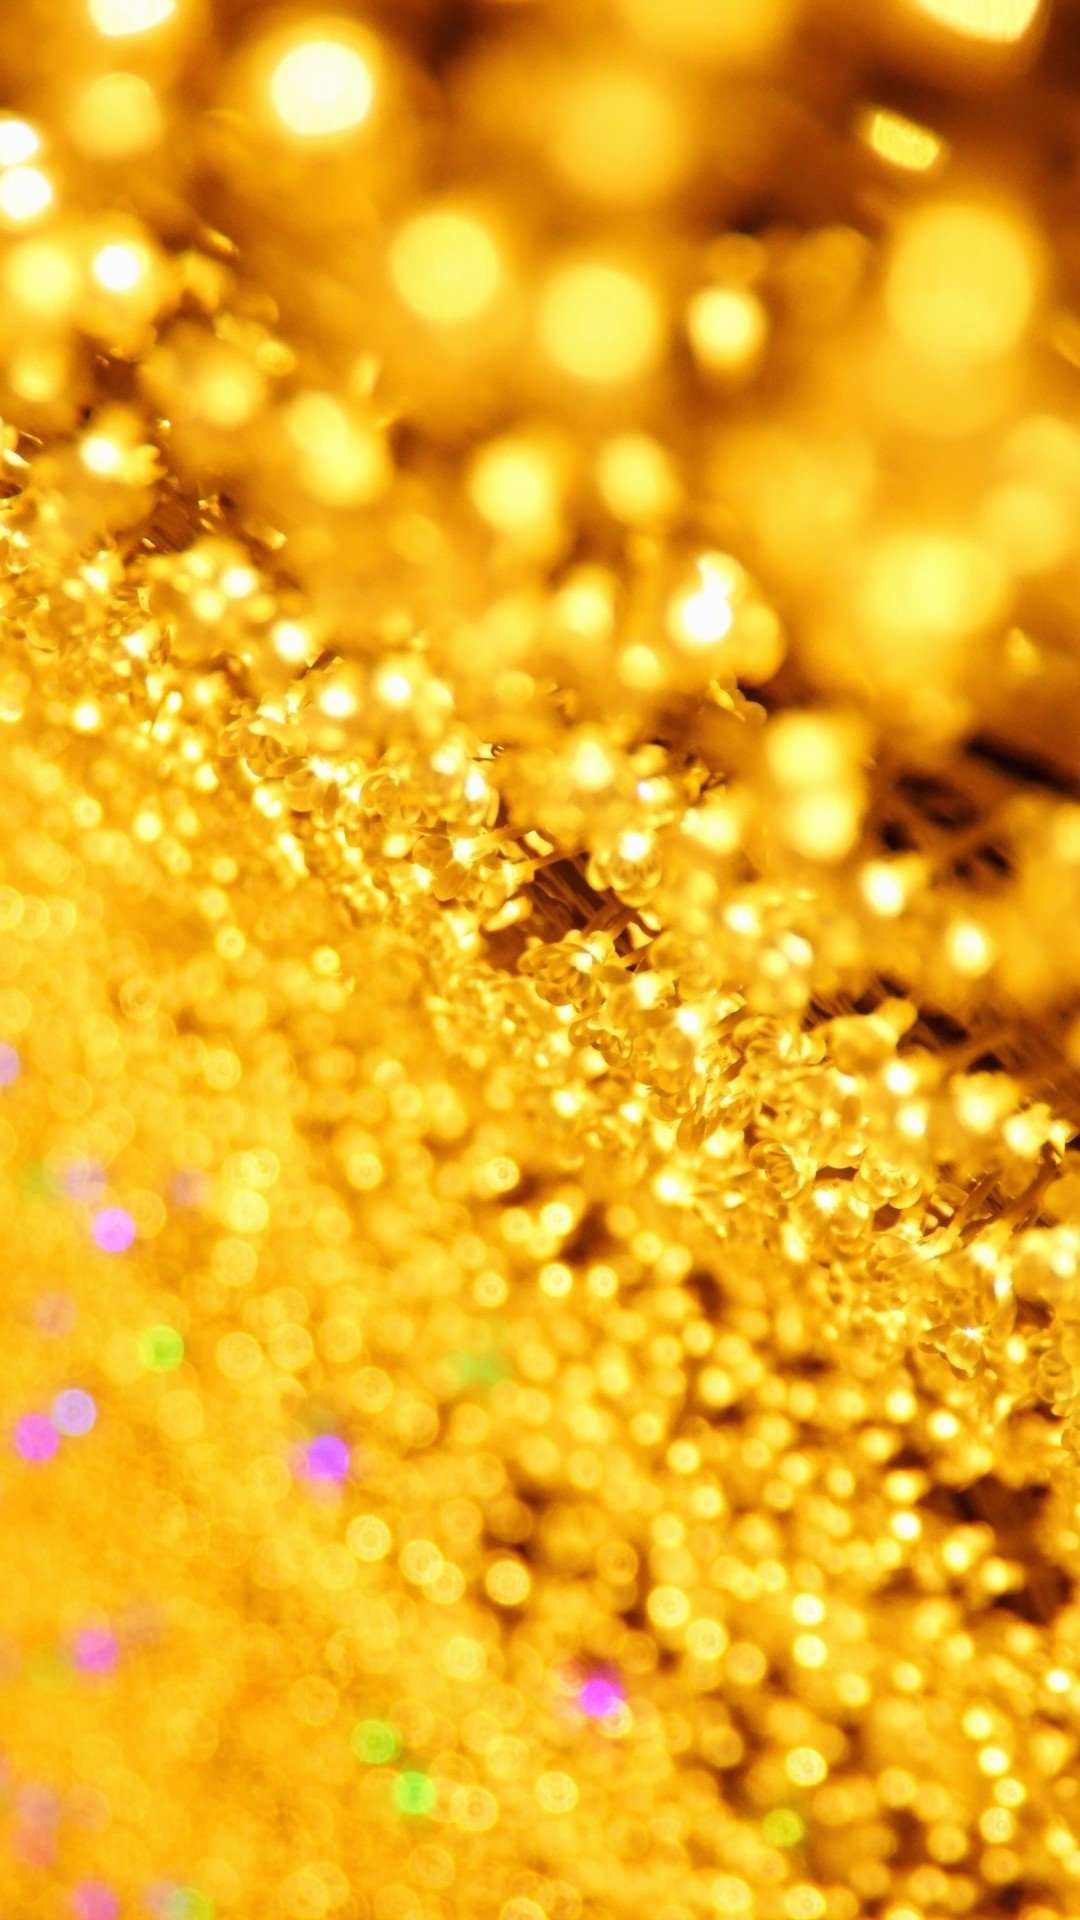 Wallpaper Gold Sparkle Android Wallpaper